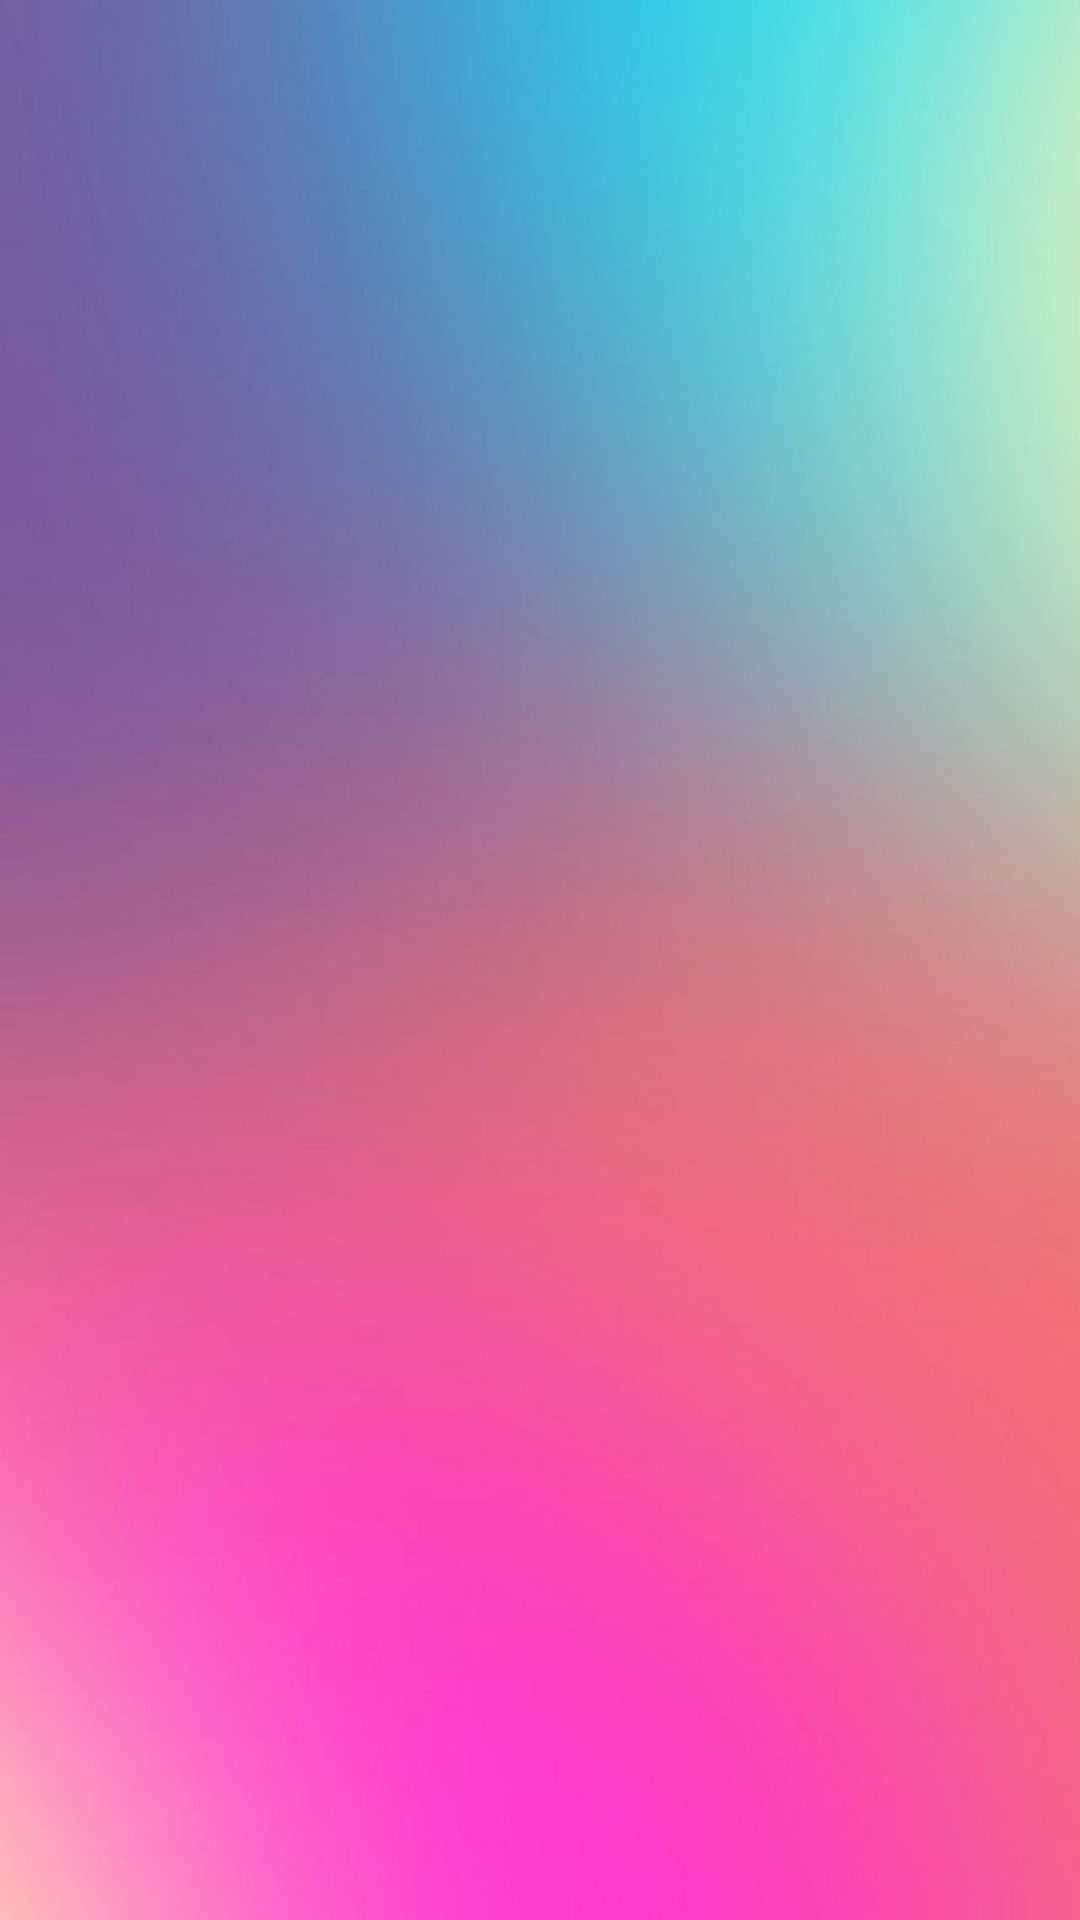 Gradient iPhone Wallpaper Design with high-resolution 1080x1920 pixel. You can set as wallpaper for Apple iPhone X, XS Max, XR, 8, 7, 6, SE, iPad. Enjoy and share your favorite HD wallpapers and background images